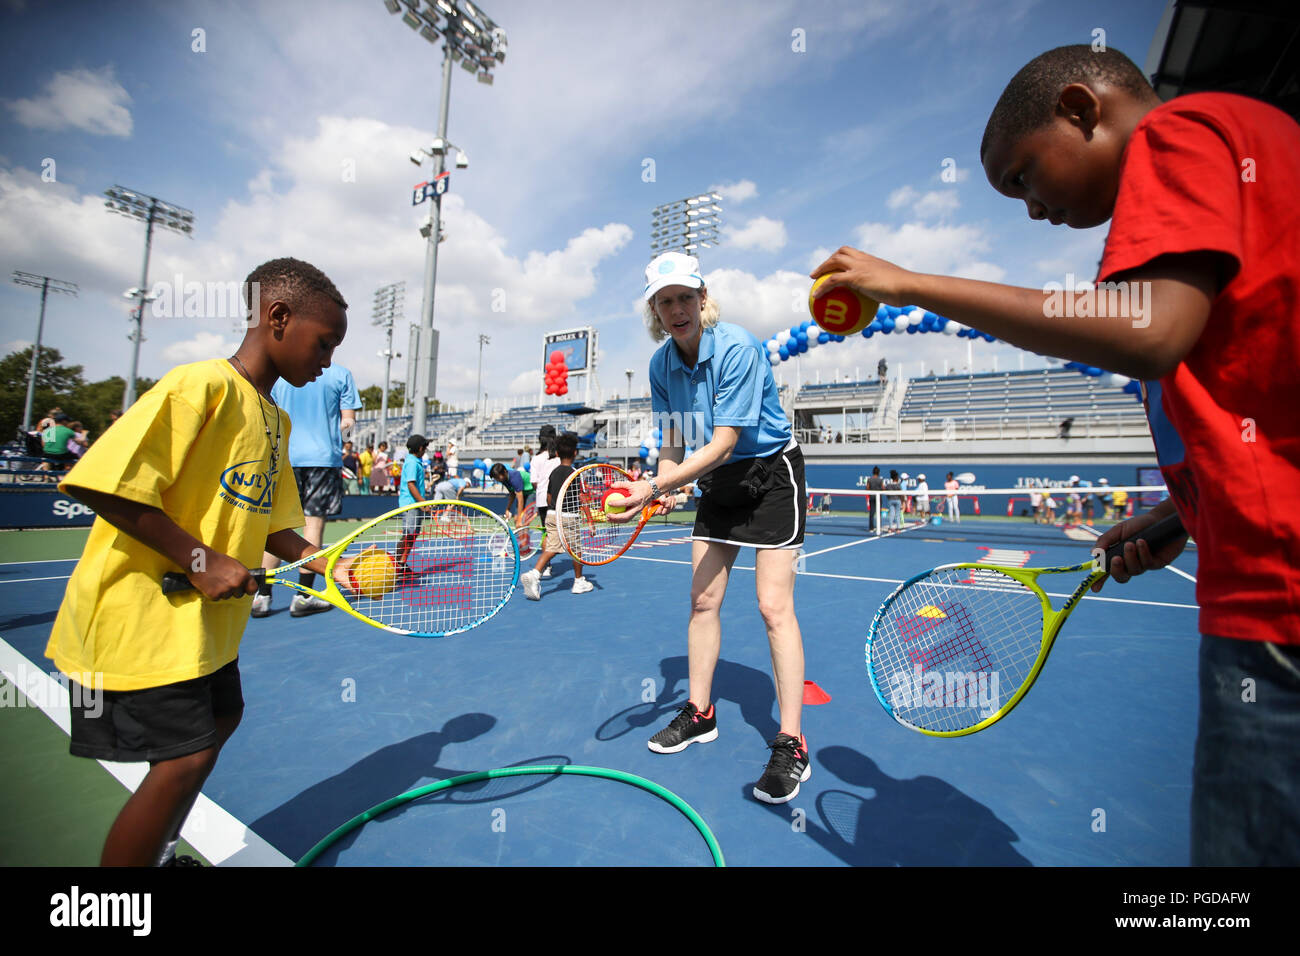 New York, USA. 25th Aug, 2018. A staff trainer teaches tennis technique to kids during the Arthur Ashe Kids' Day of the U.S. Open in New York, the United States, Aug. 25, 2018. Credit: Wang Ying/Xinhua/Alamy Live News Stock Photo